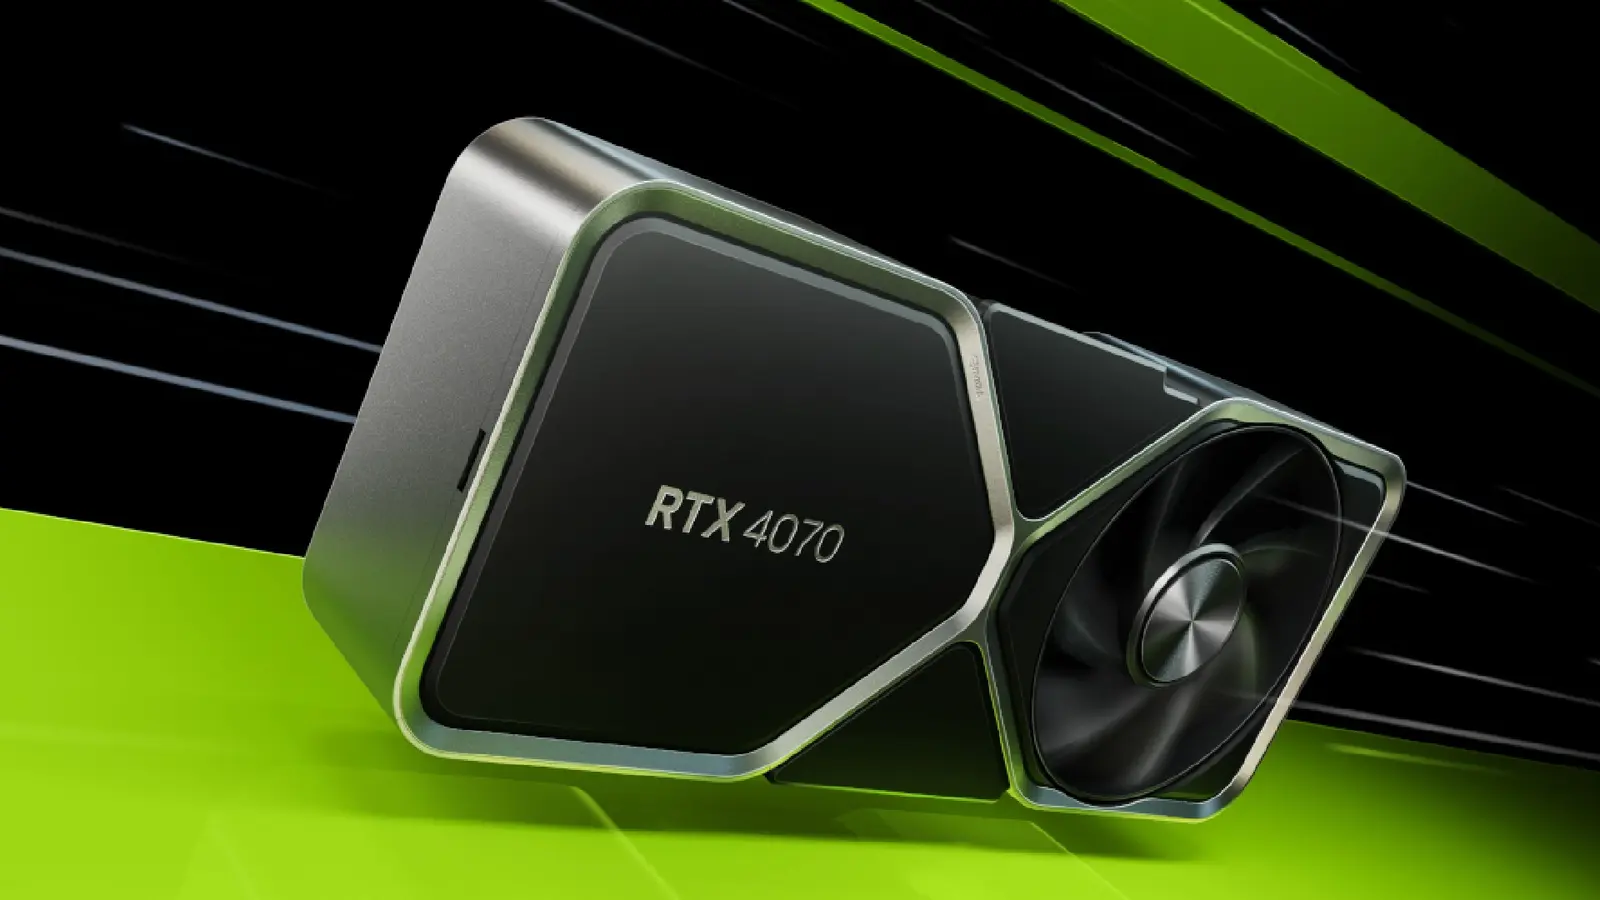 an nvidia rtx 3070 graphics card is sitting on top of a green surface .